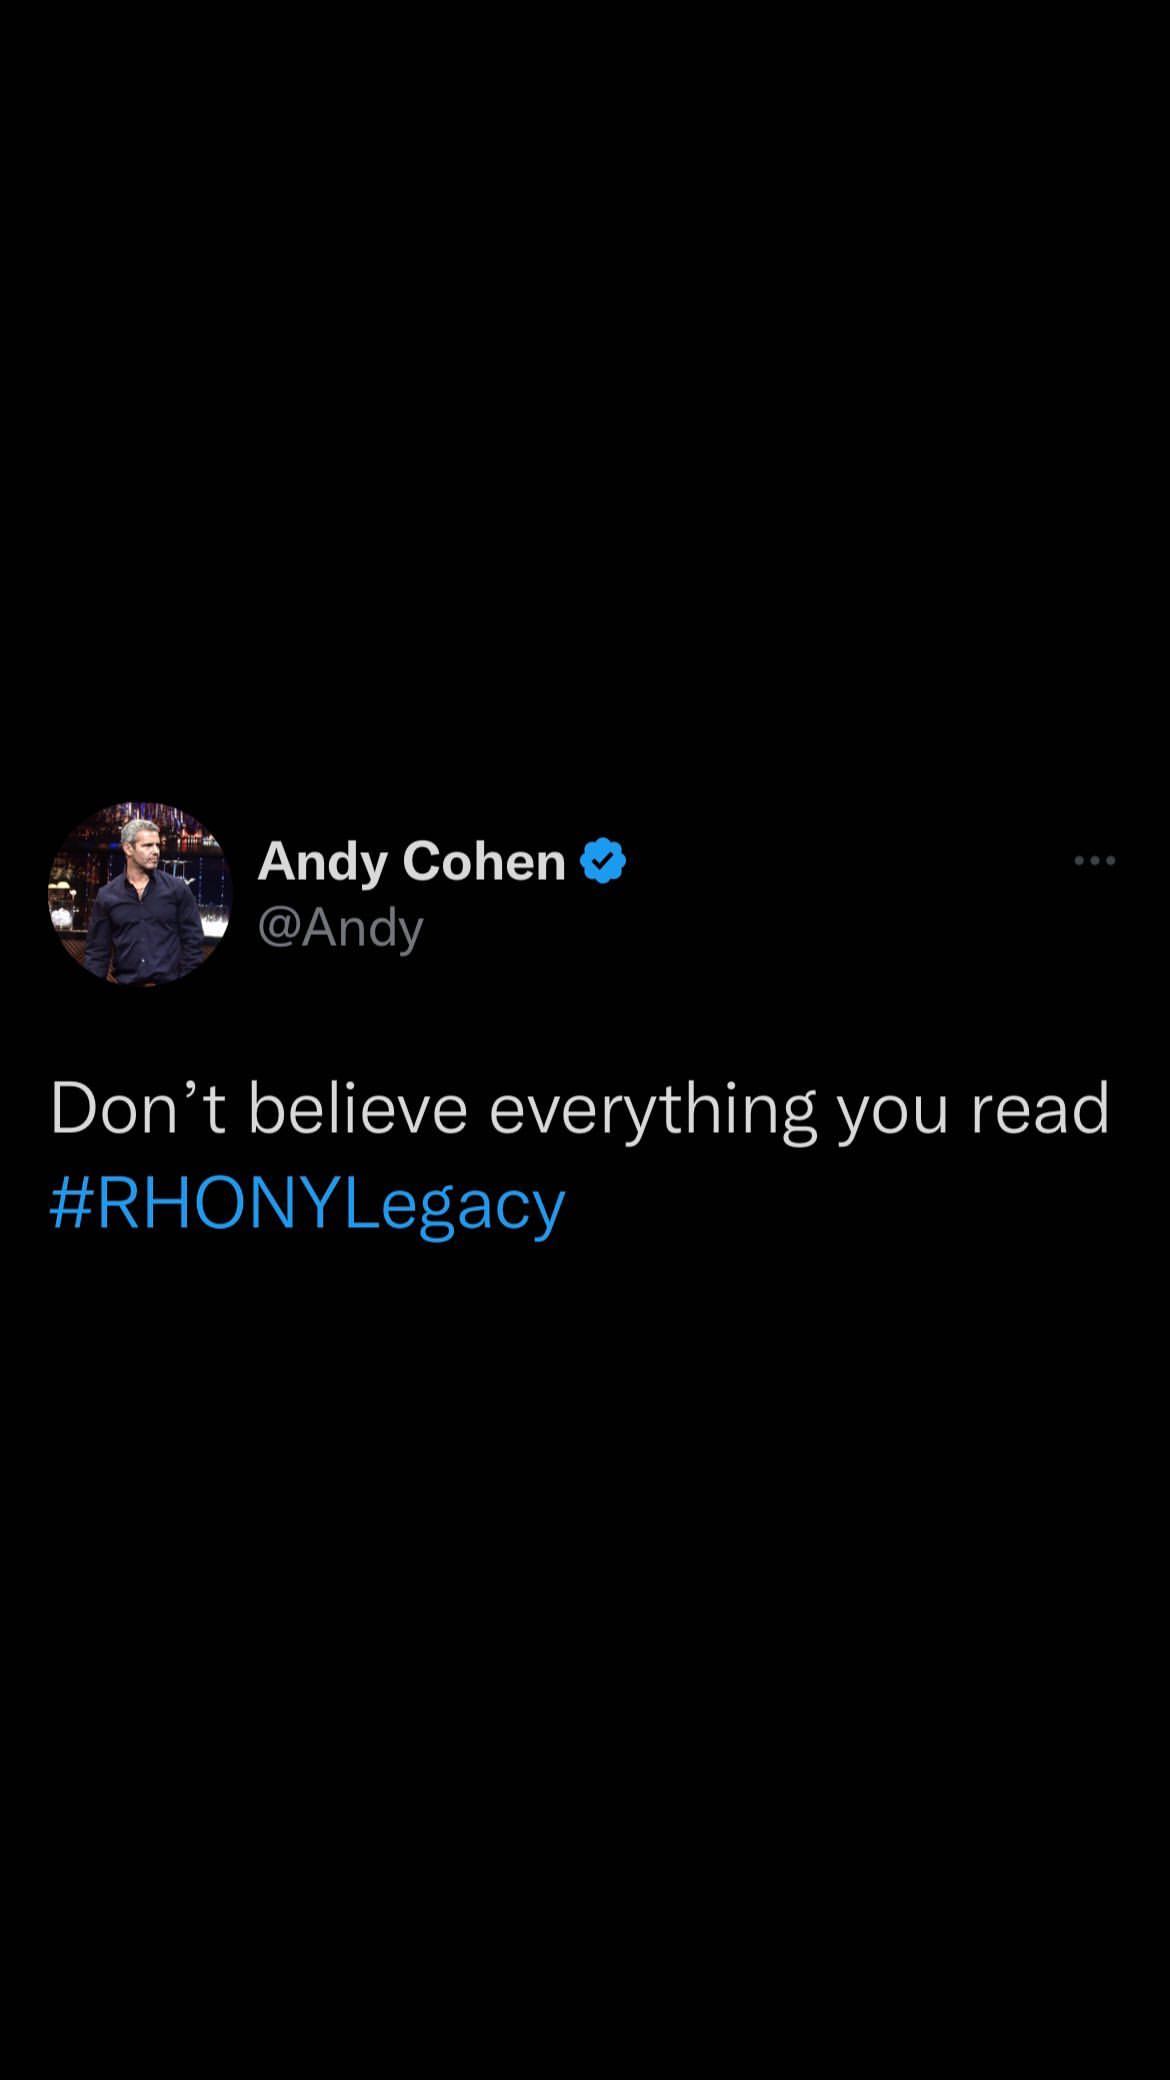 //andy cohen